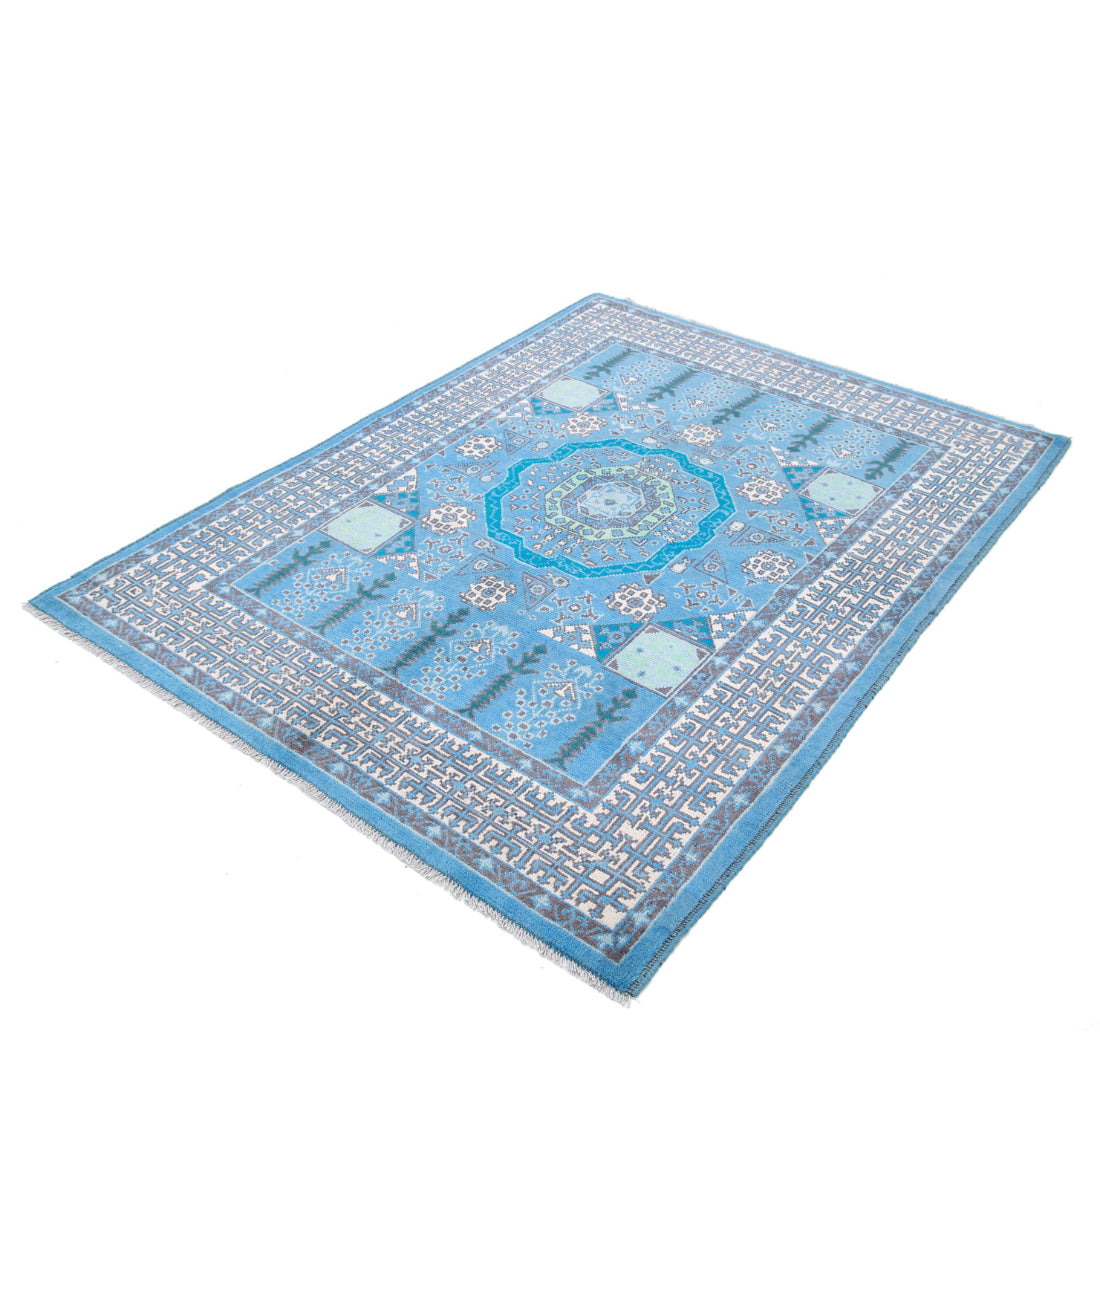 Revival 4'11'' X 6'7'' Hand-Knotted Wool Rug 4'11'' x 6'7'' (148 X 198) / Blue / Ivory